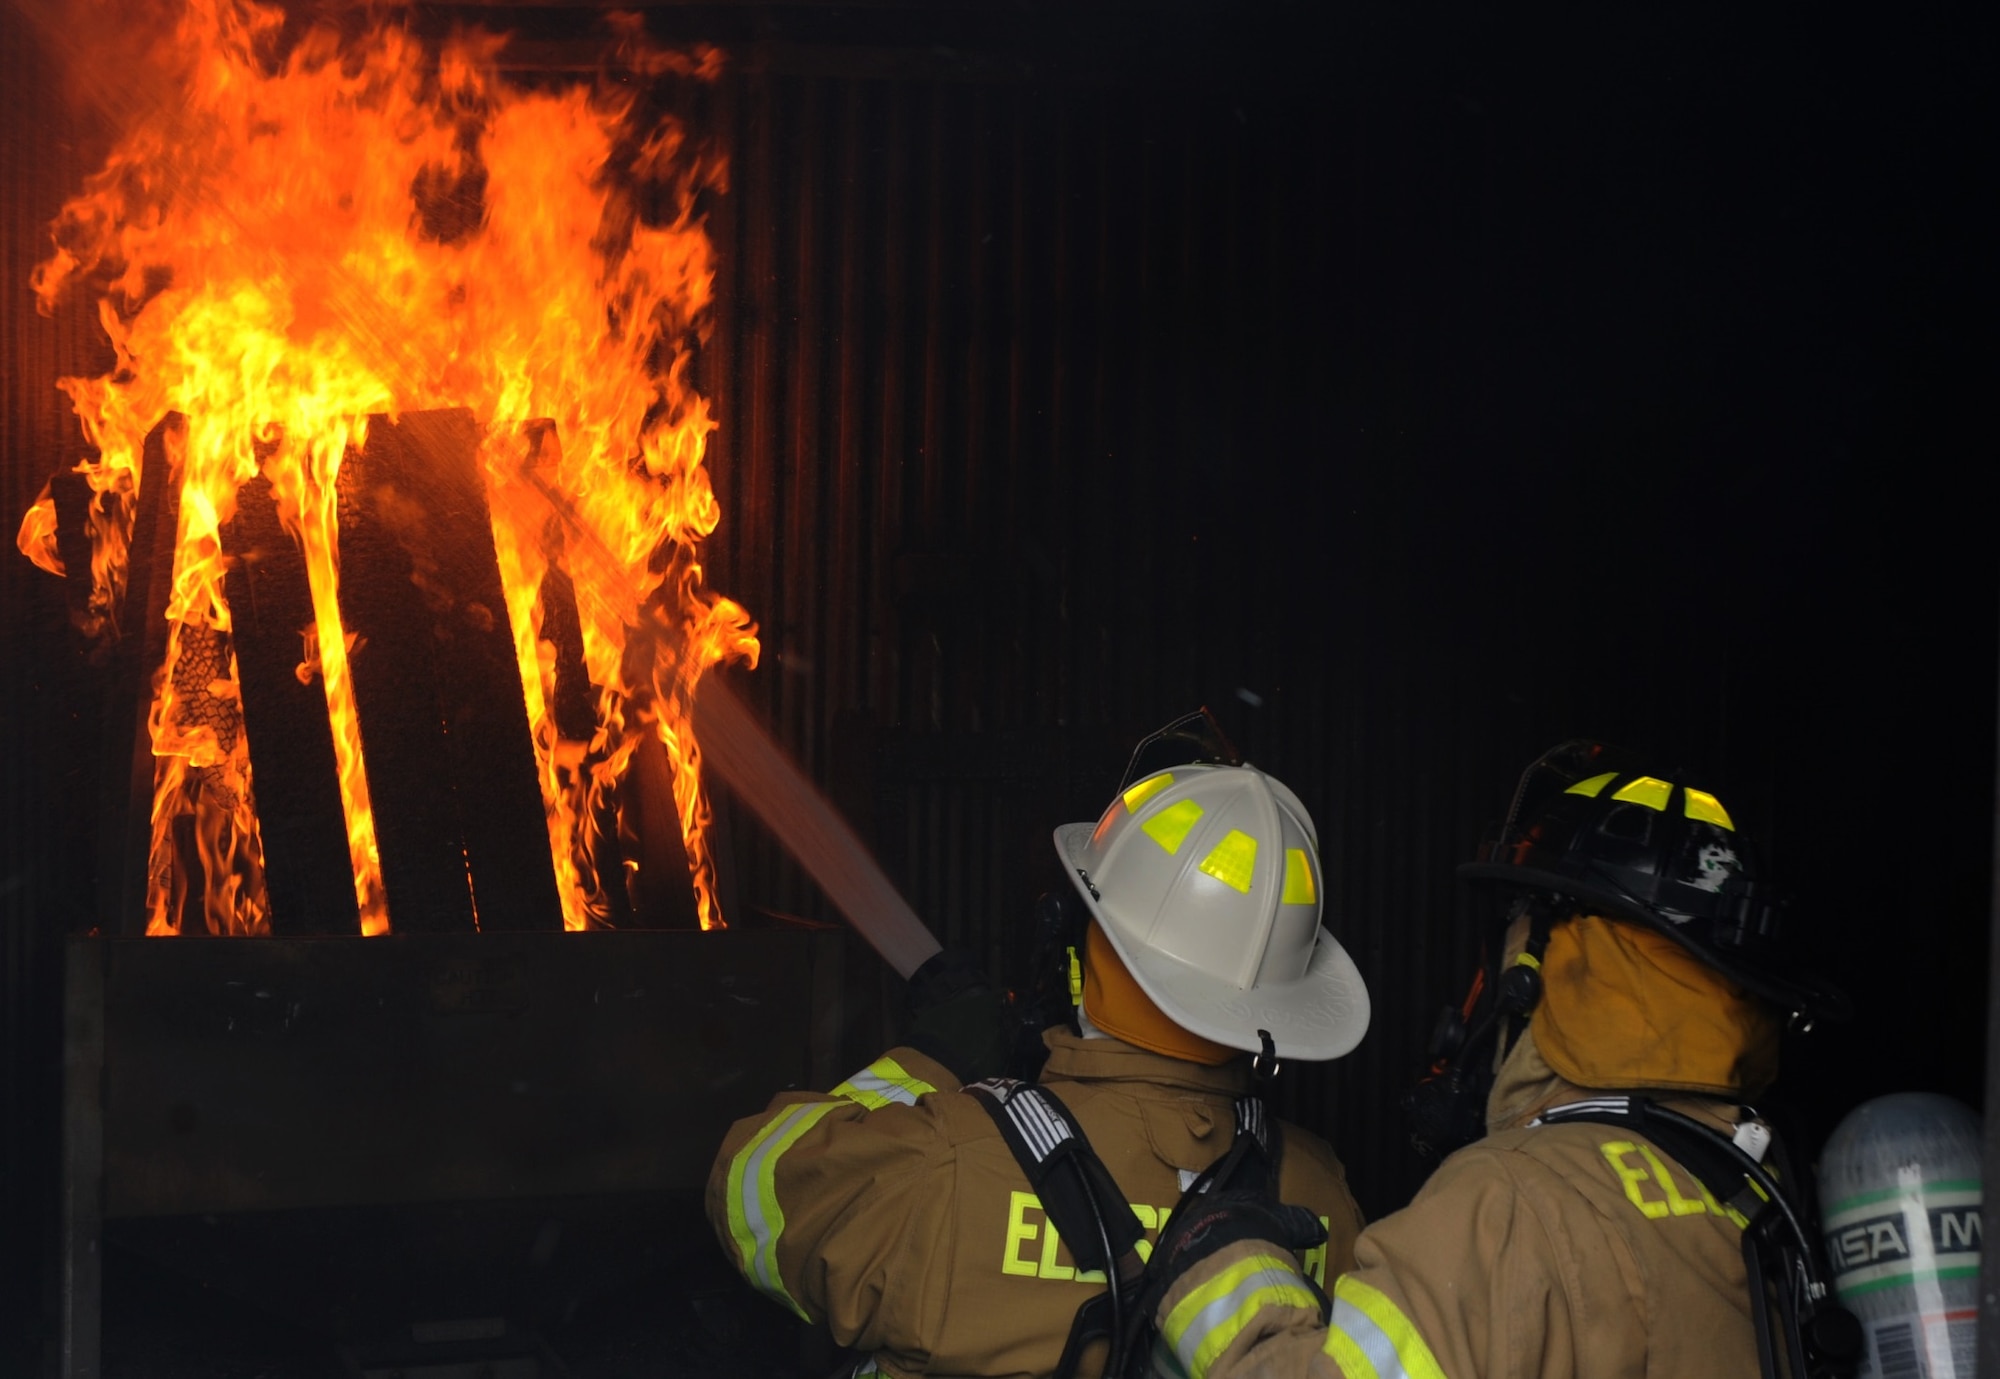 Members of the 28th Civil Engineer Squadron Fire and Emergency Services conduct training at Ellsworth Air Force Base, S.D., on March 29, 2016. Cooking is the biggest cause of home fires, which is way kitchen fire safety is so important. (U.S. Air Force photo by Airman 1st Class Denise Jenson)